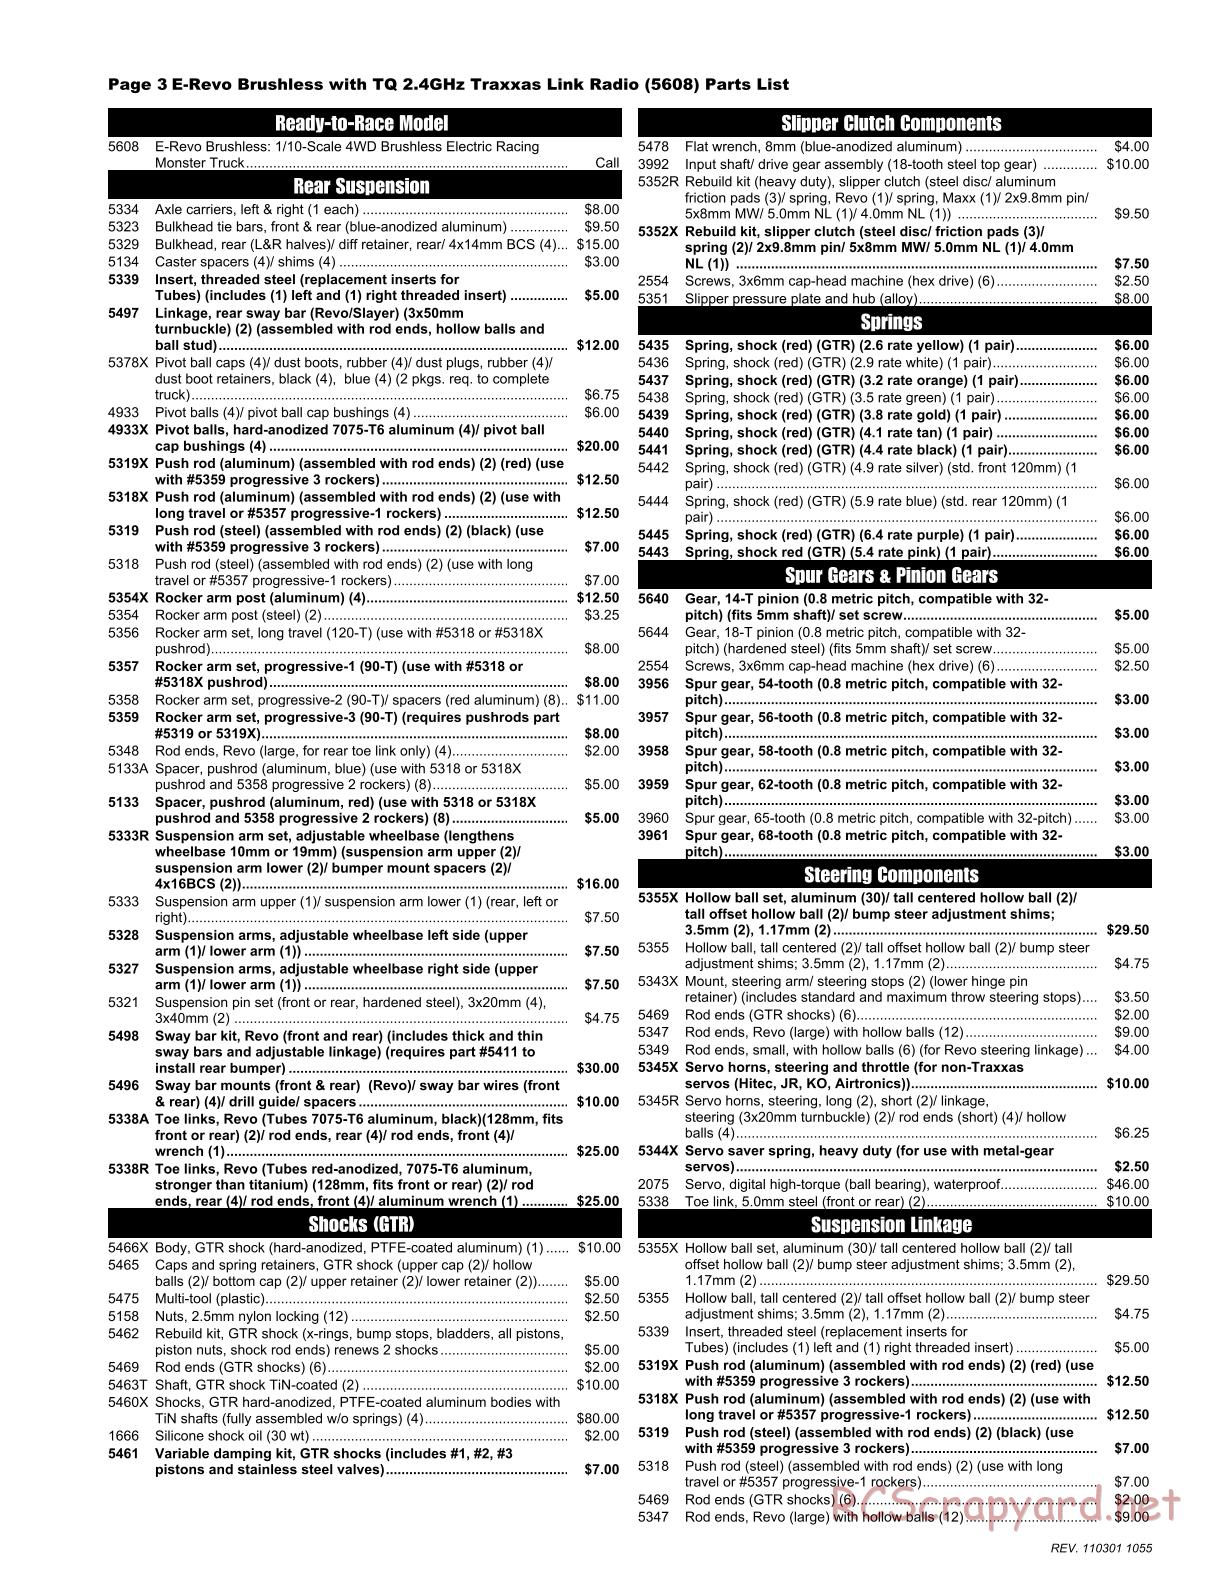 Traxxas - E-Revo Brushless (2009) - Parts List - Page 3